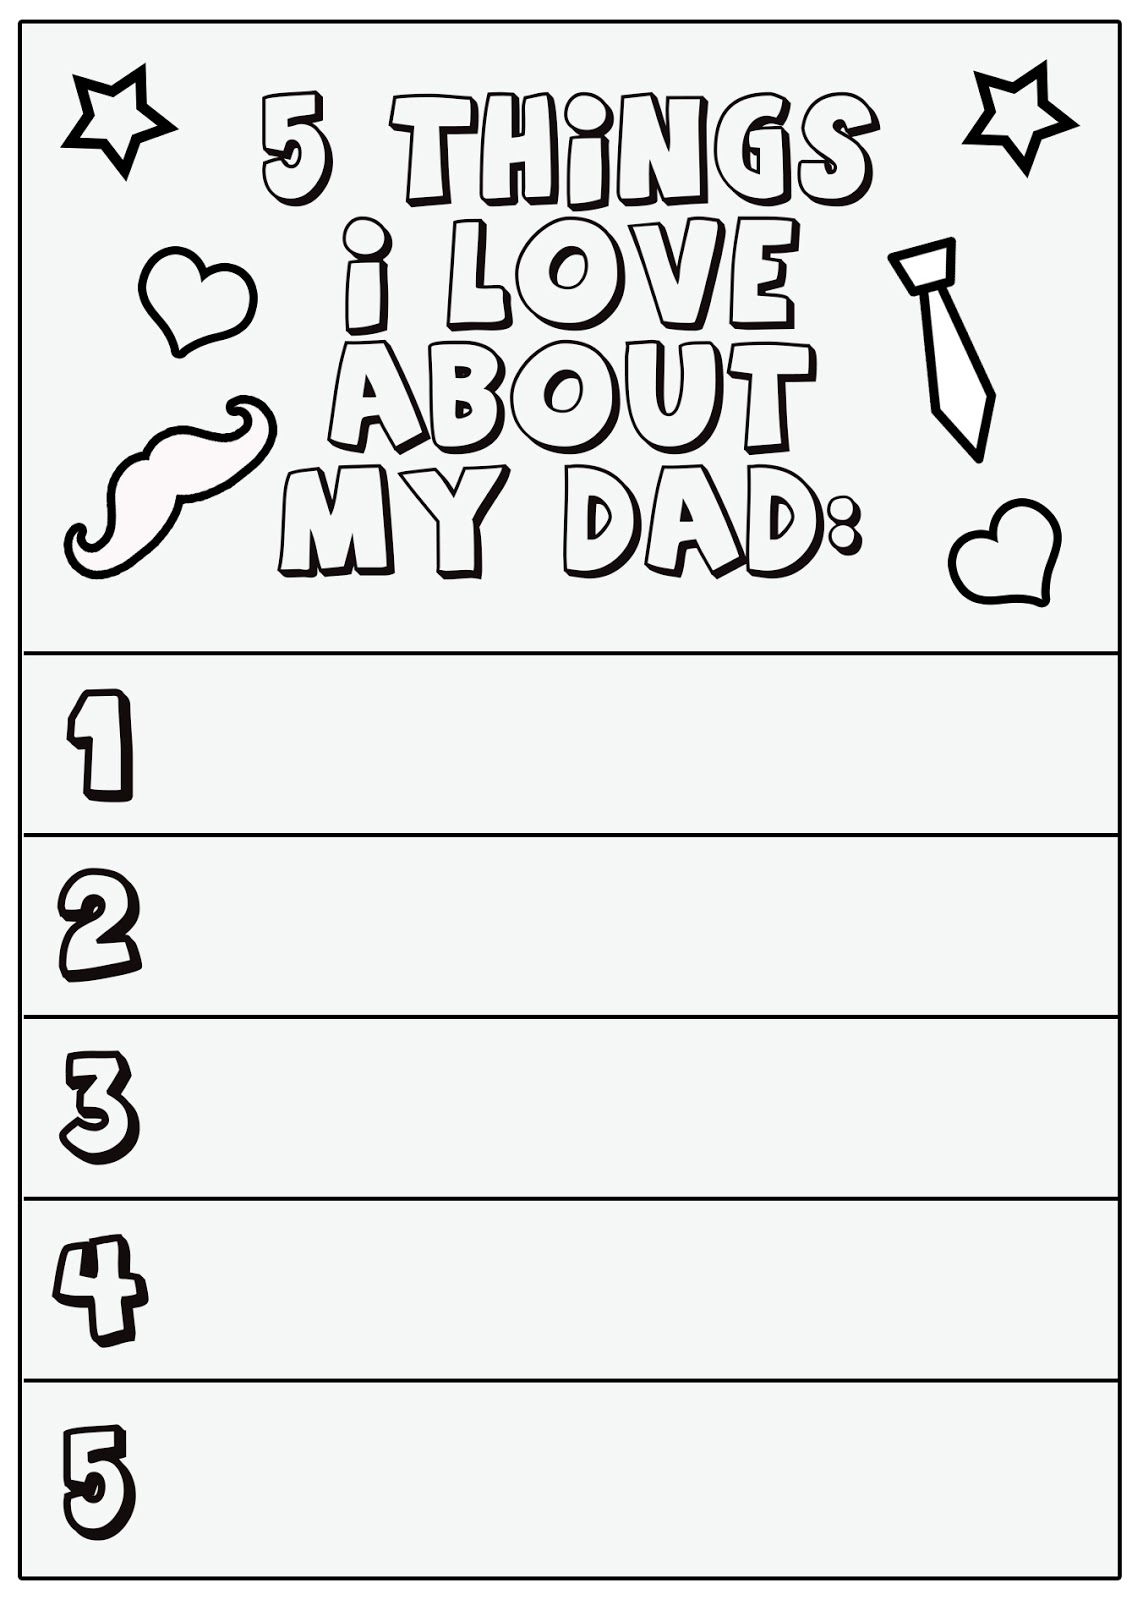 free-printable-father-s-day-card-5-things-i-love-about-my-dad-mr